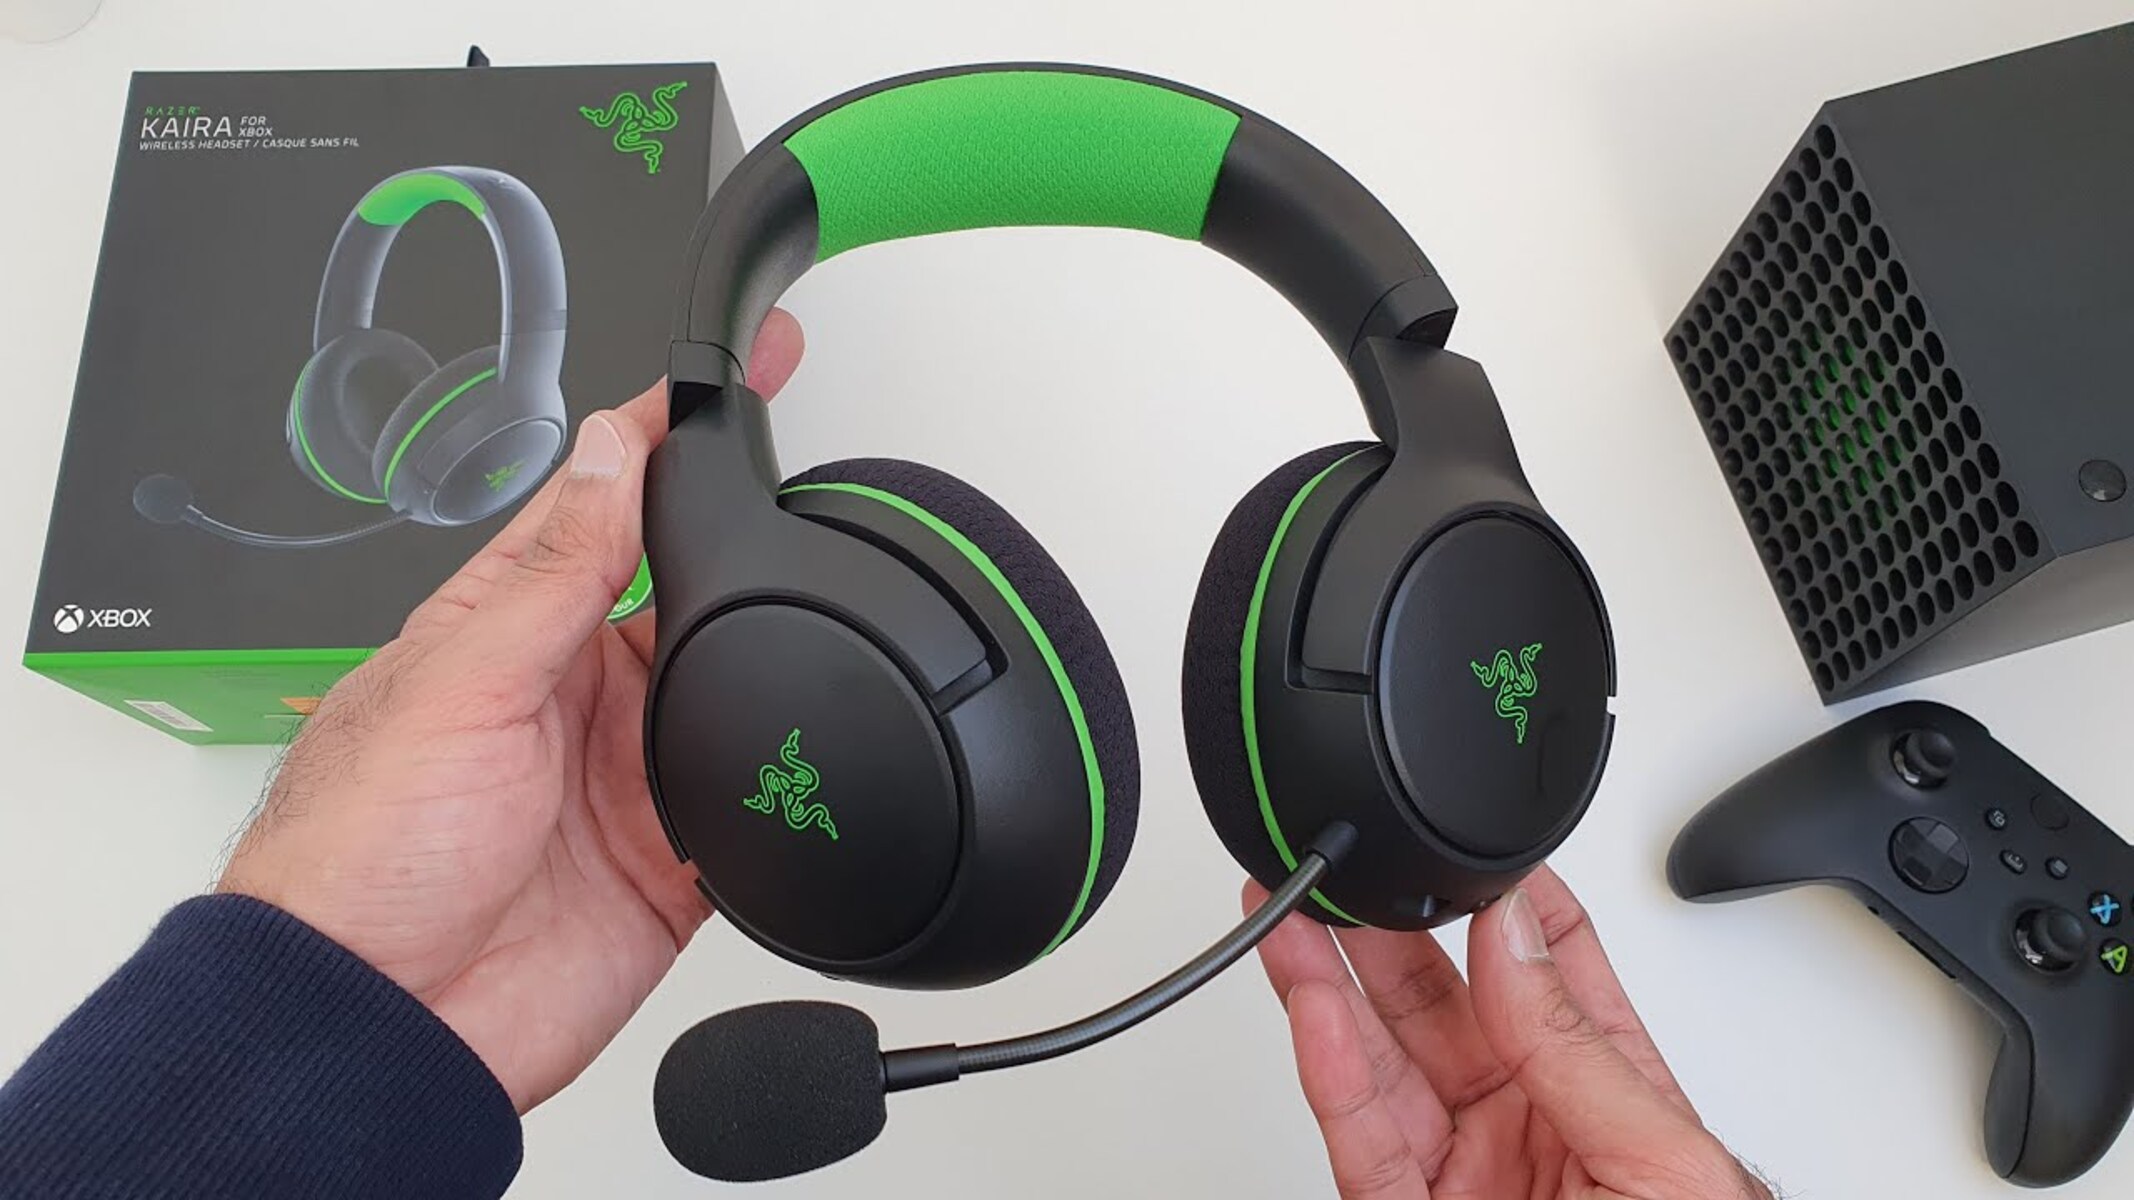 How To Plug In Razer Gaming Headset